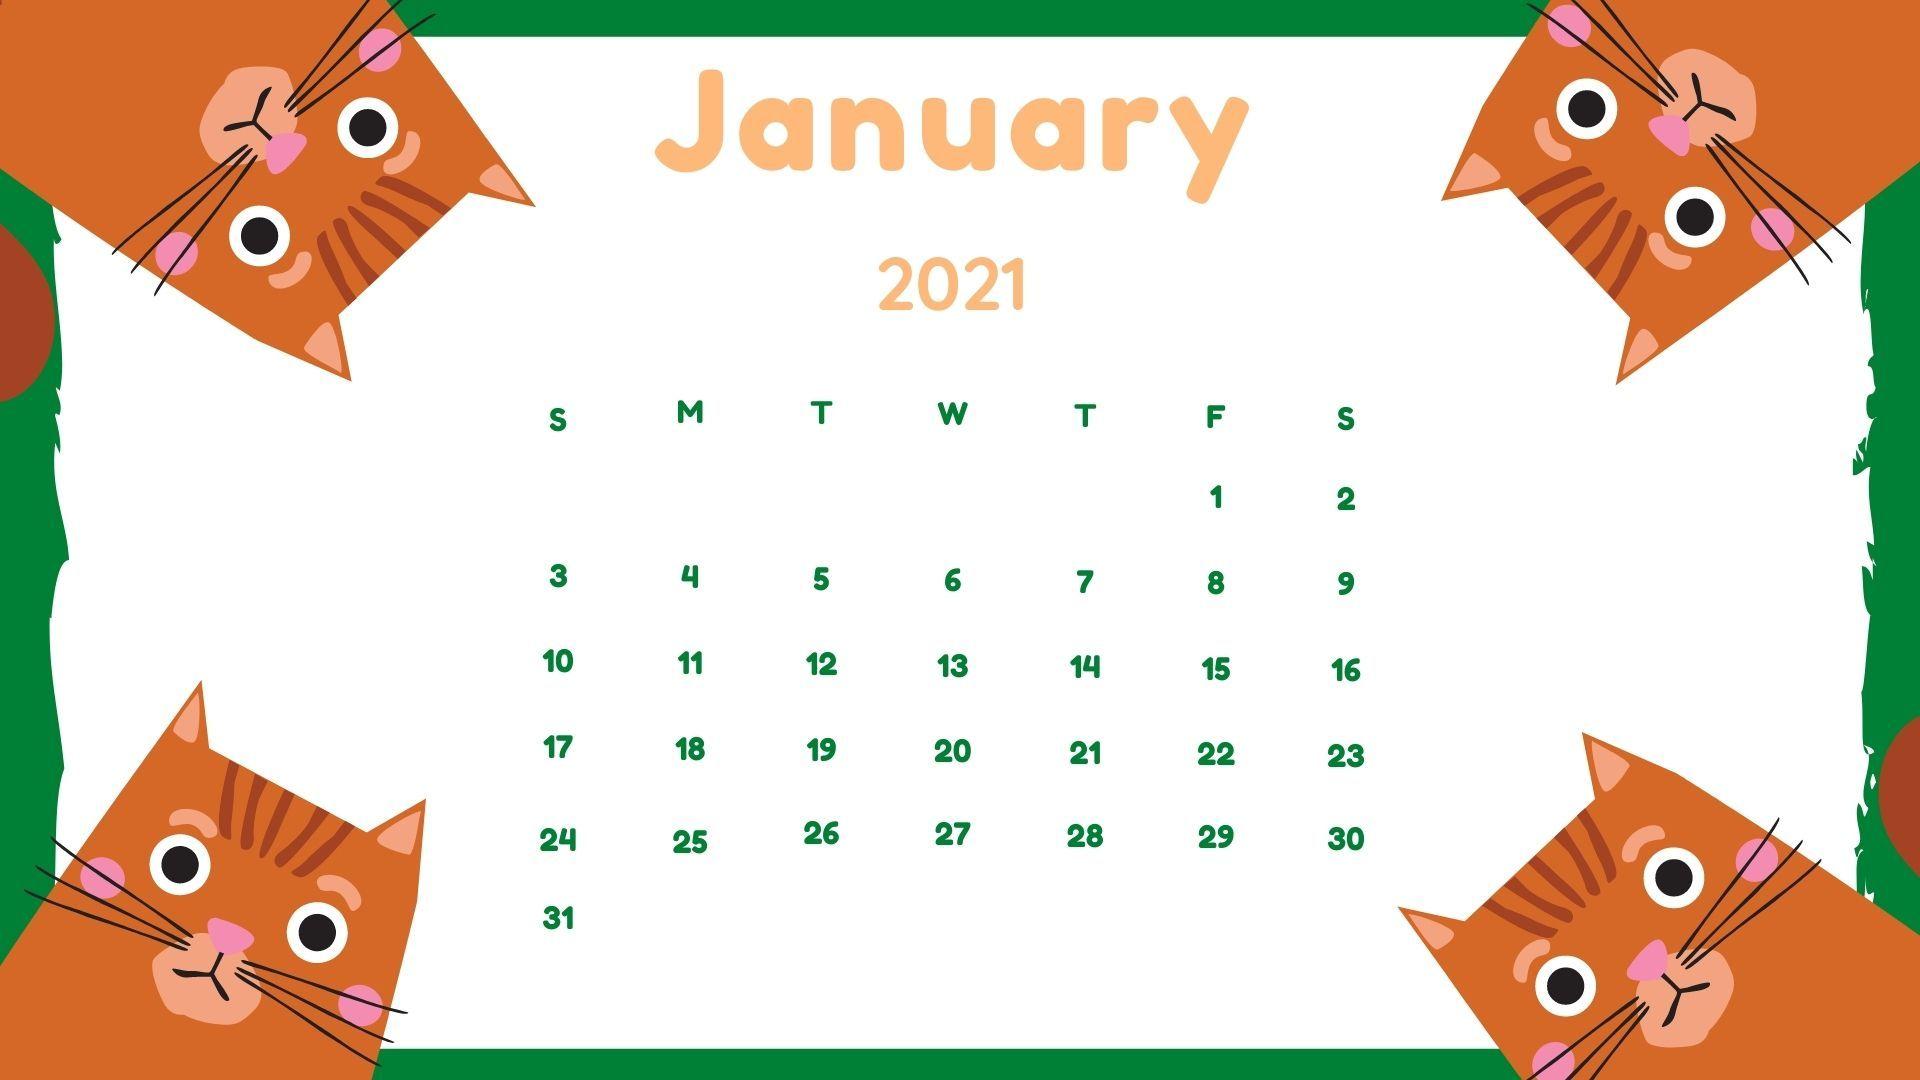 Featured image of post January Calendar 2021 Background - You can print out the calendar and laminate it for your reference all year long, download it and type in additional holidays and commitments, or even make it the background.